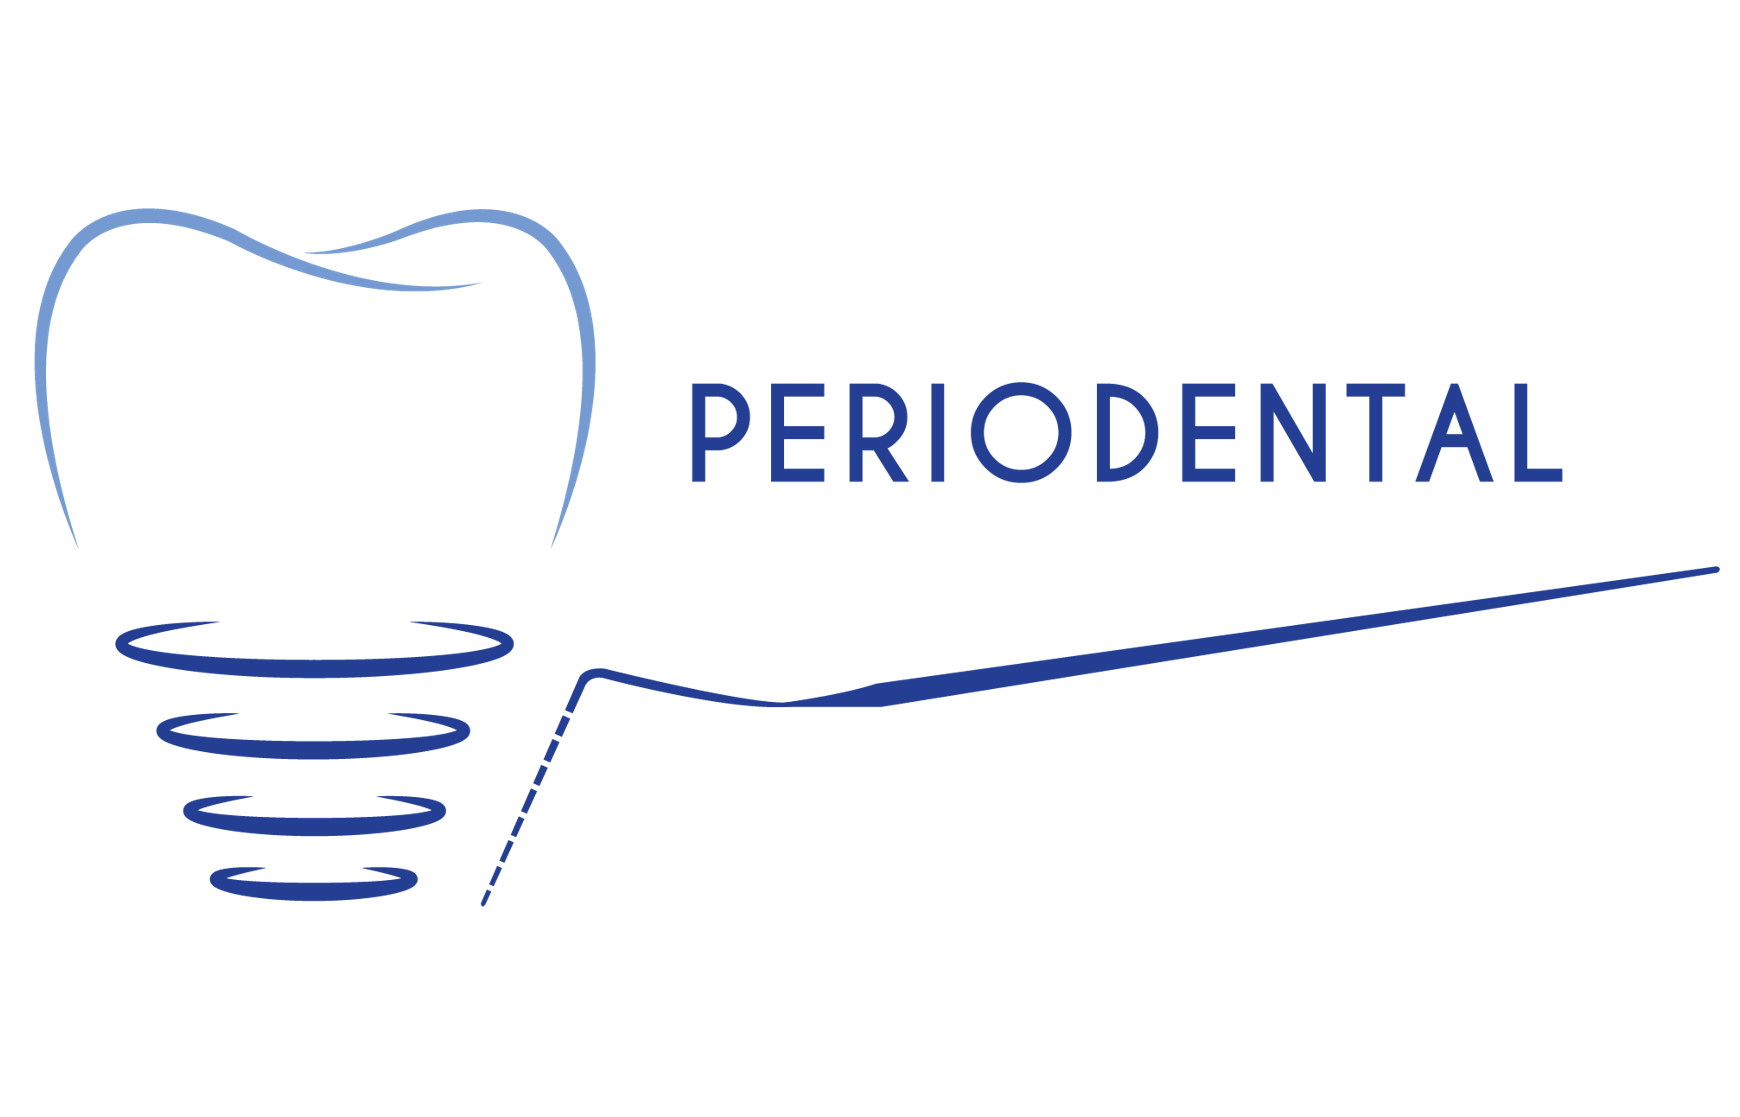 Periodental